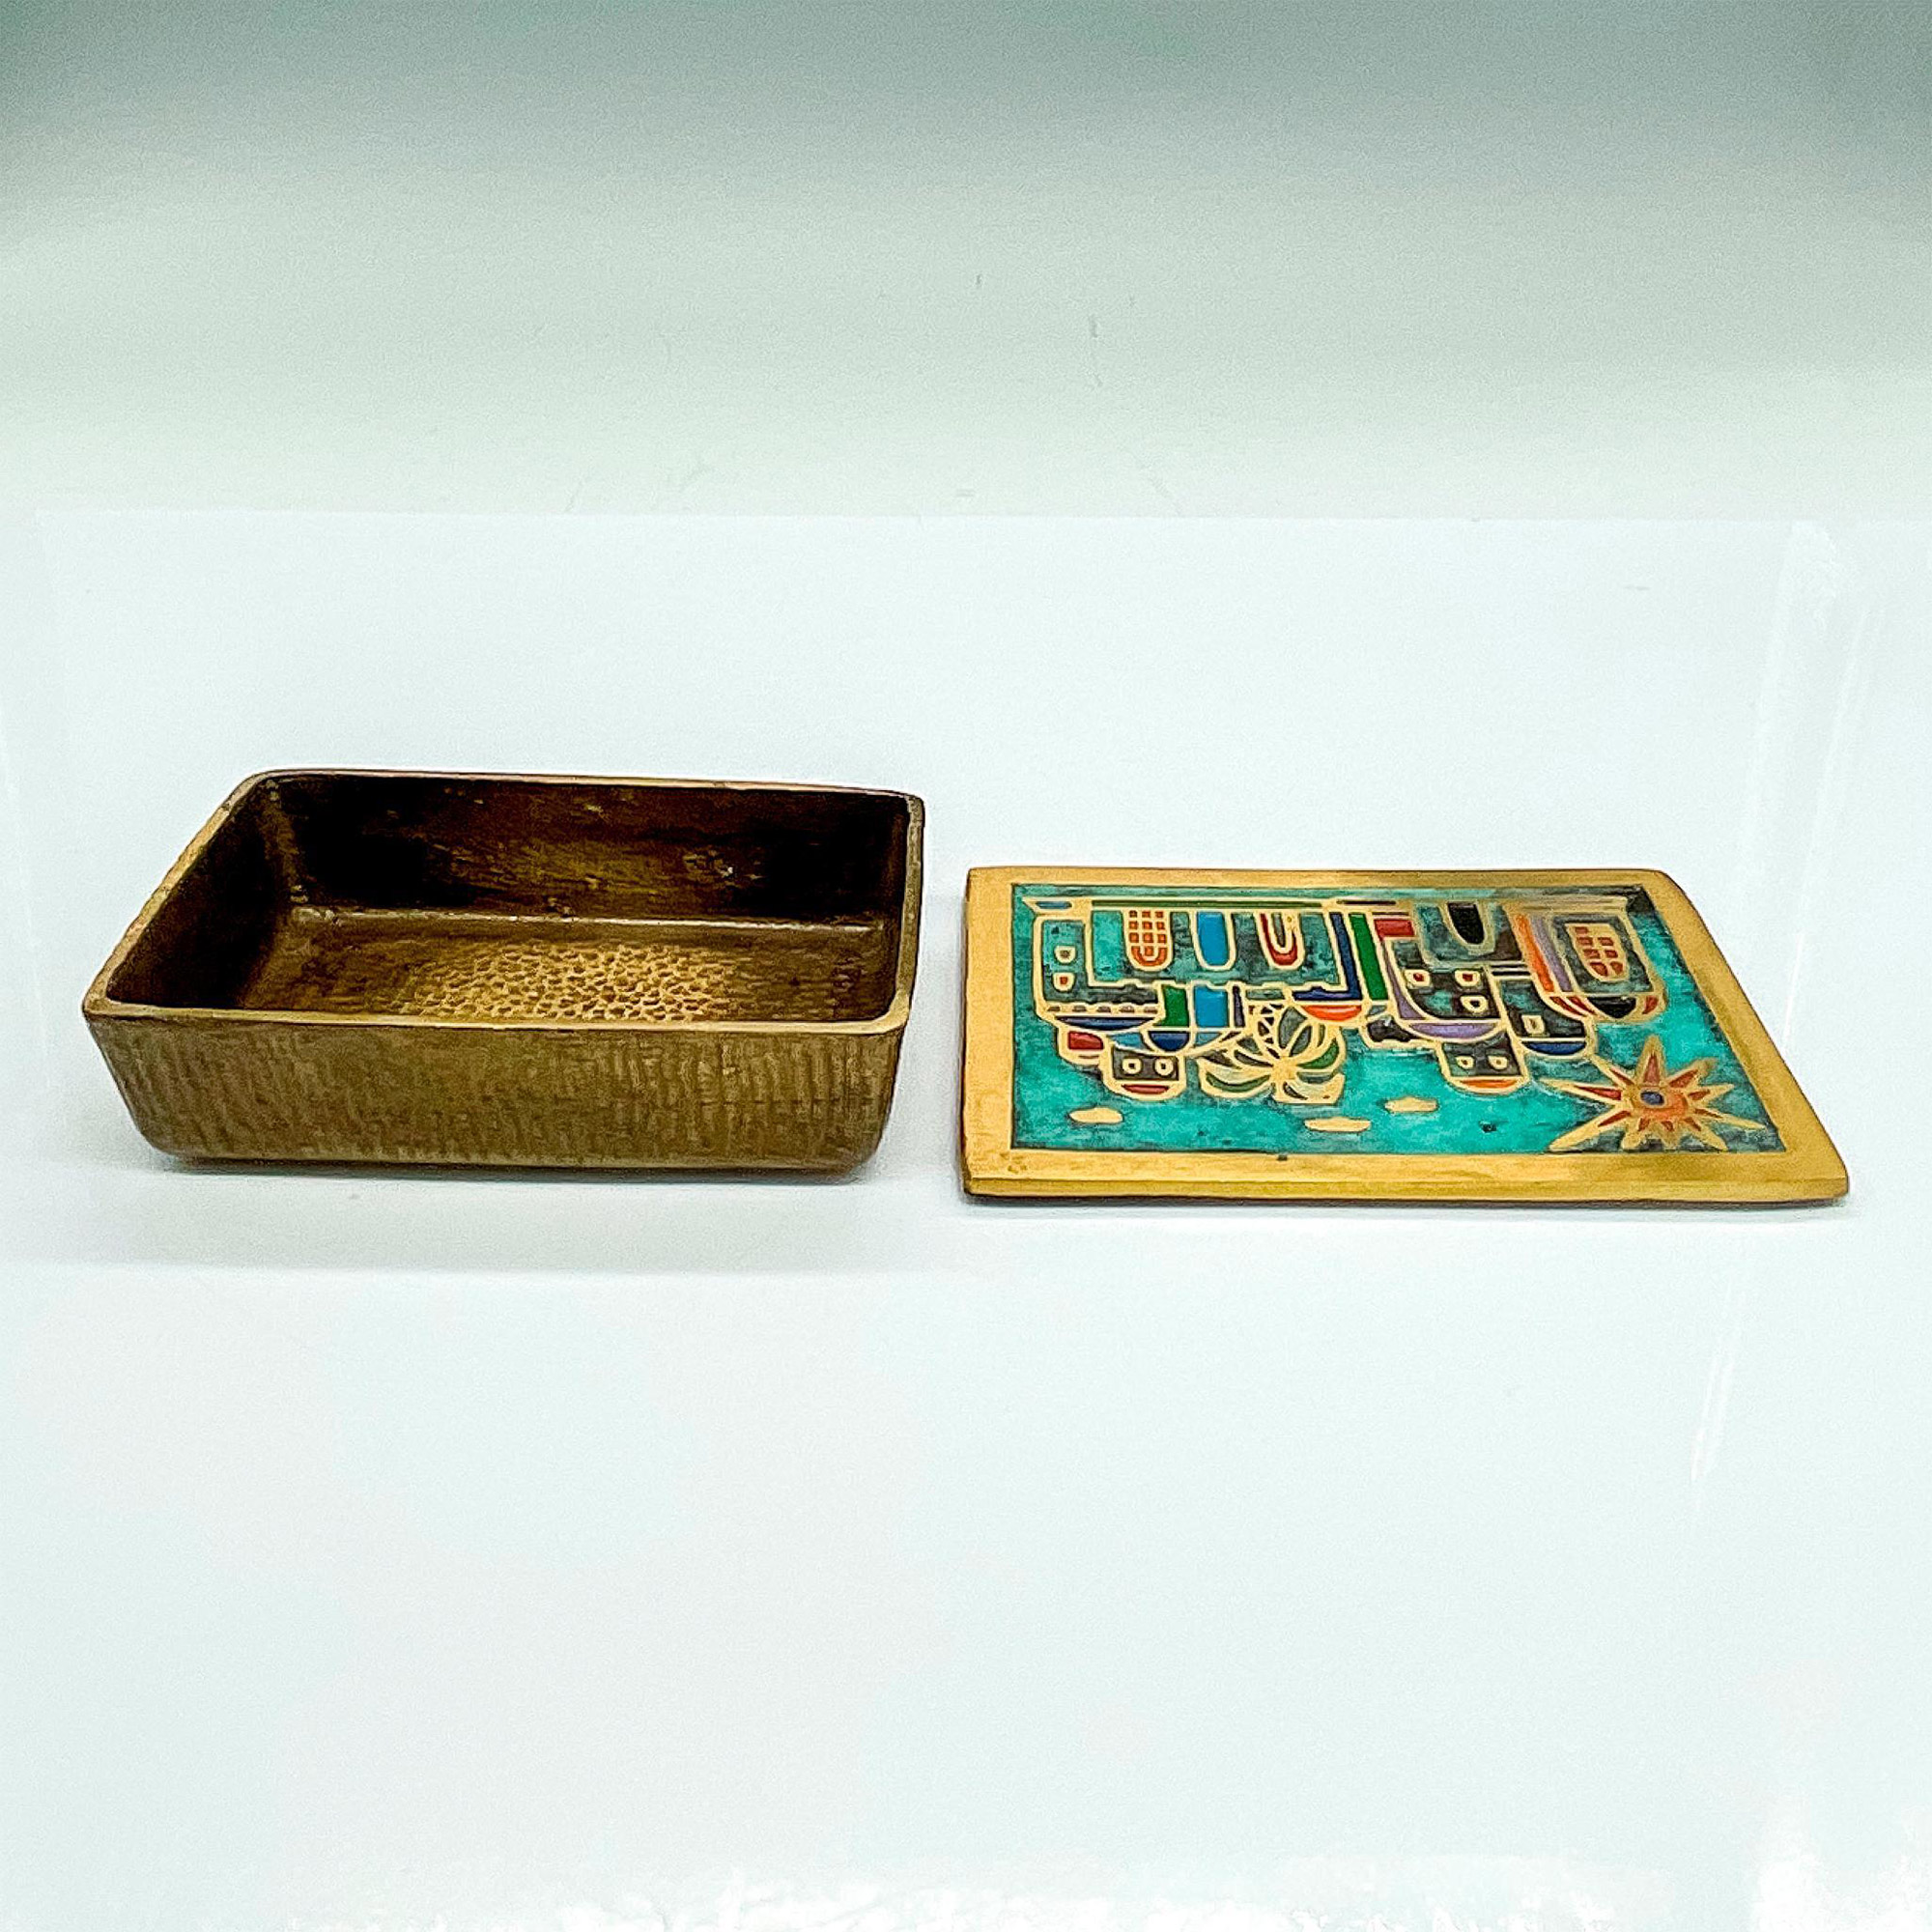 Vintage Brass Lidded Treasure Box, Cityscape and Sun - Image 3 of 4